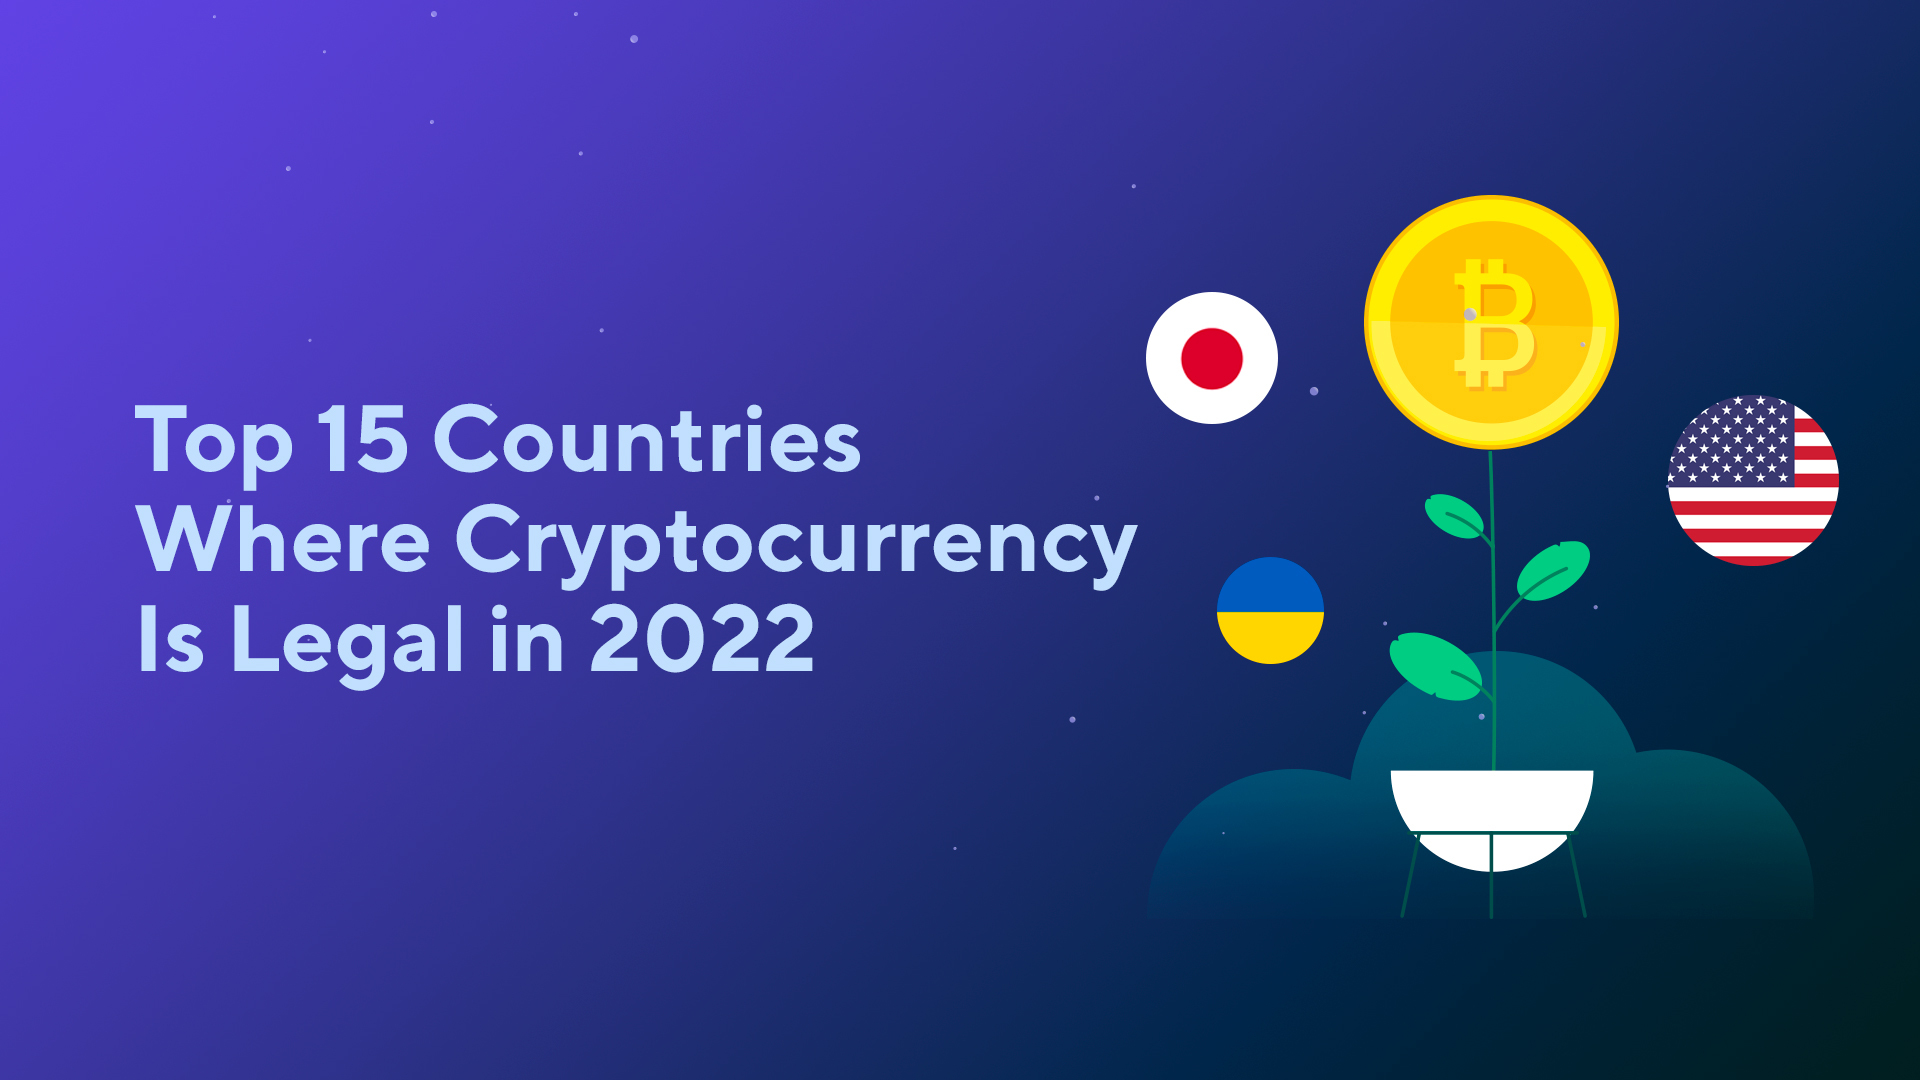 Top 15 Countries Where Cryptocurrency Is Legal in 2022